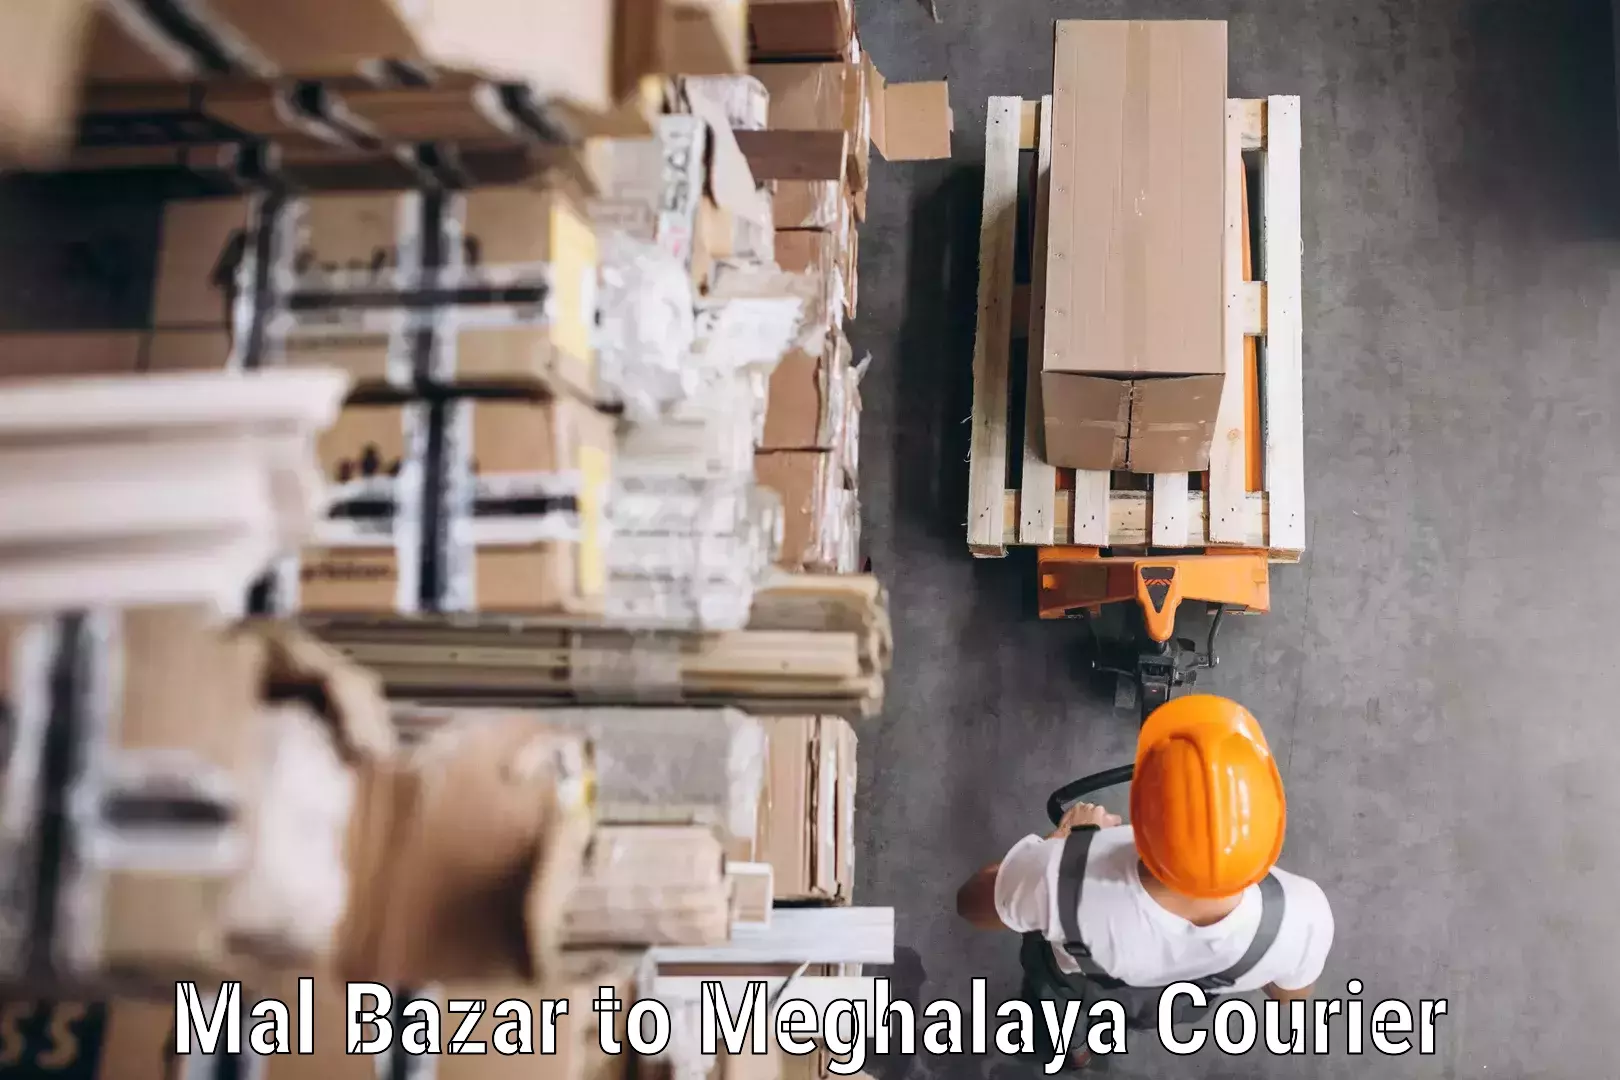 Overnight delivery services Mal Bazar to Meghalaya